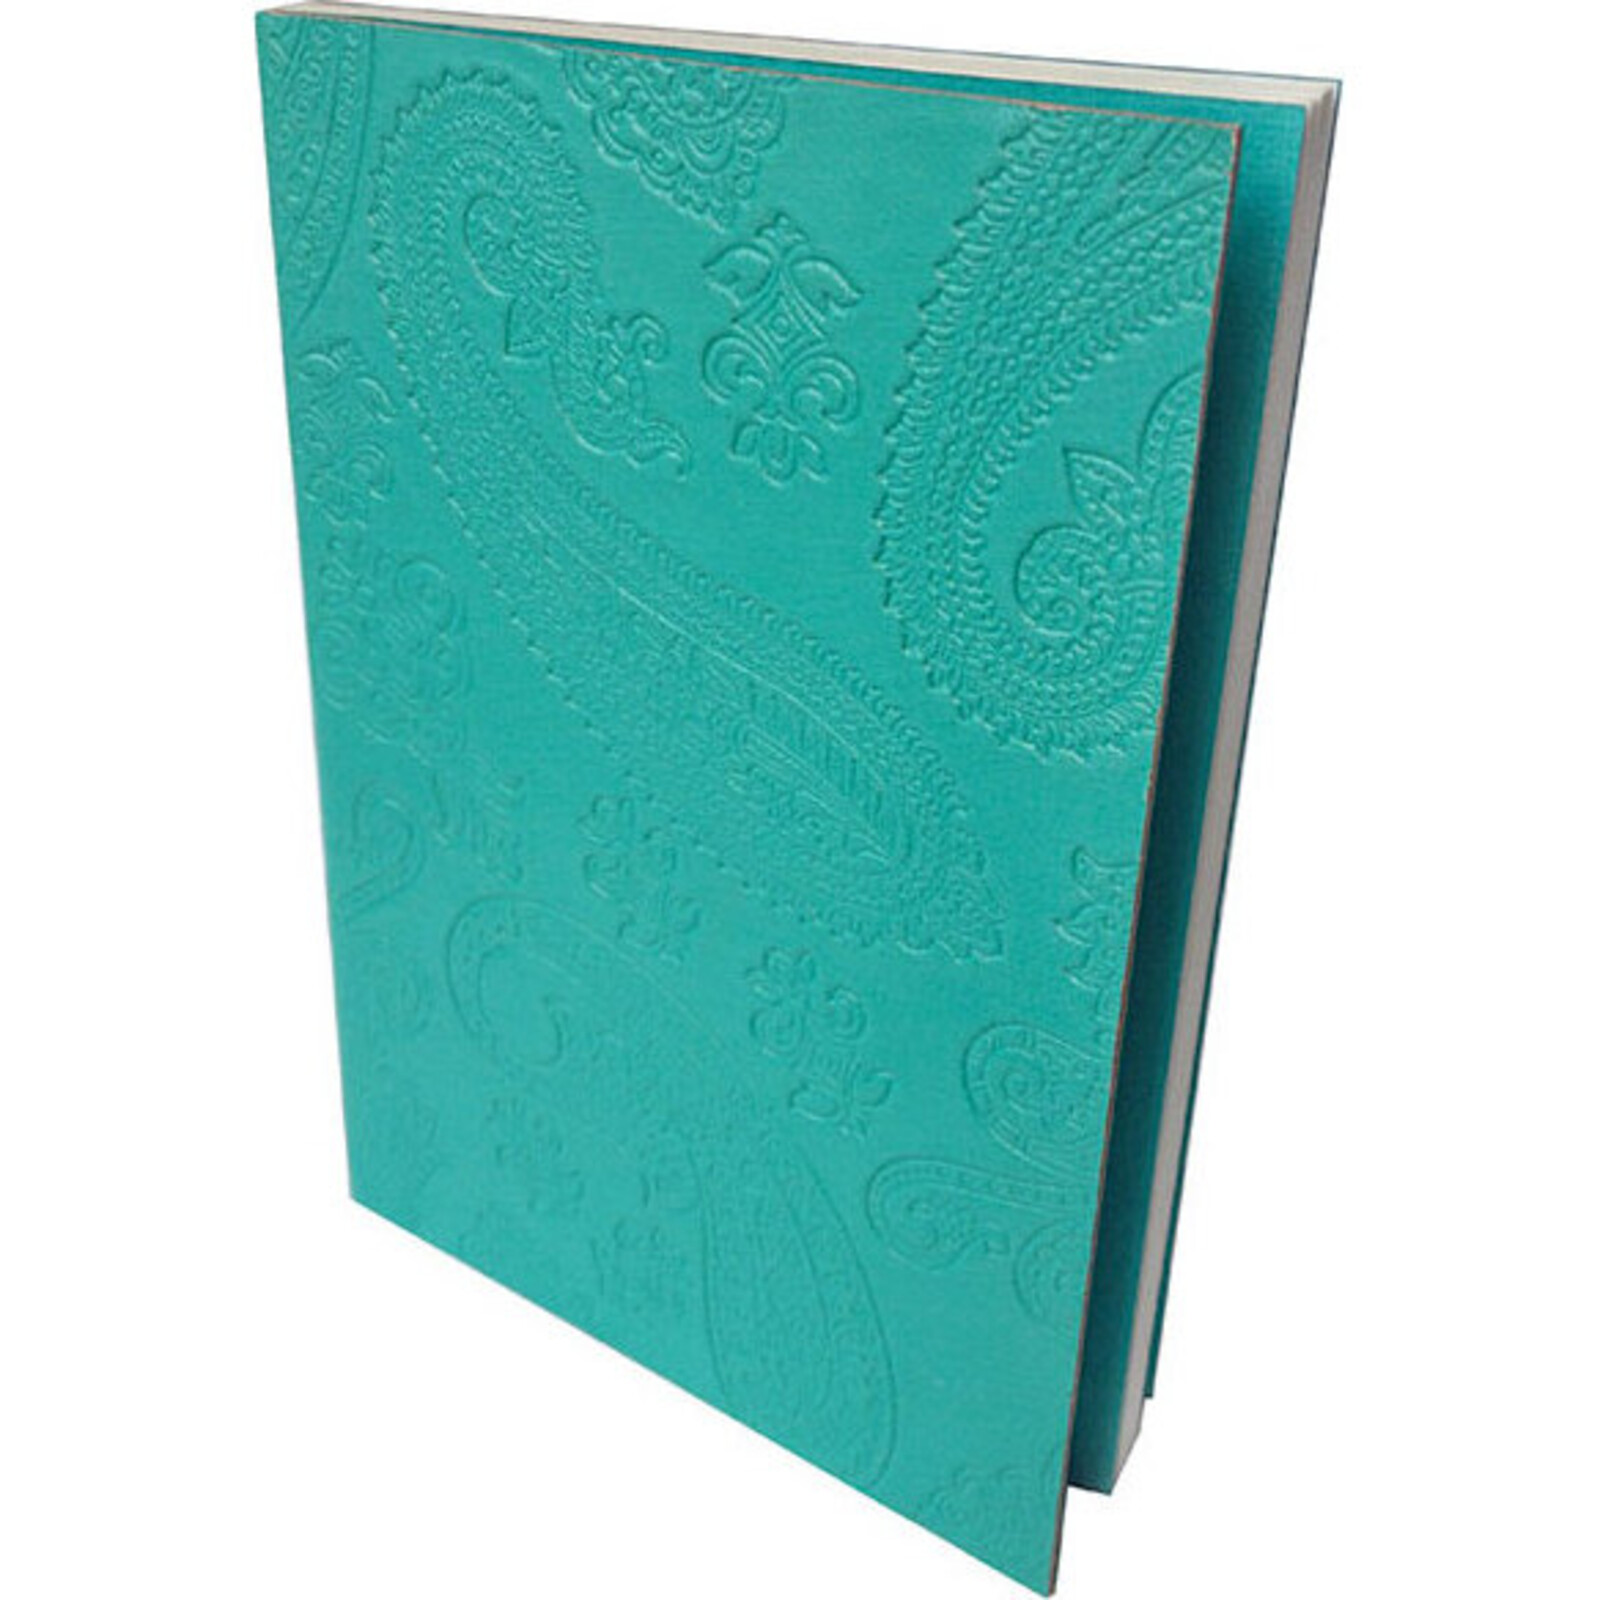 Teal Leather Notebook Paisley